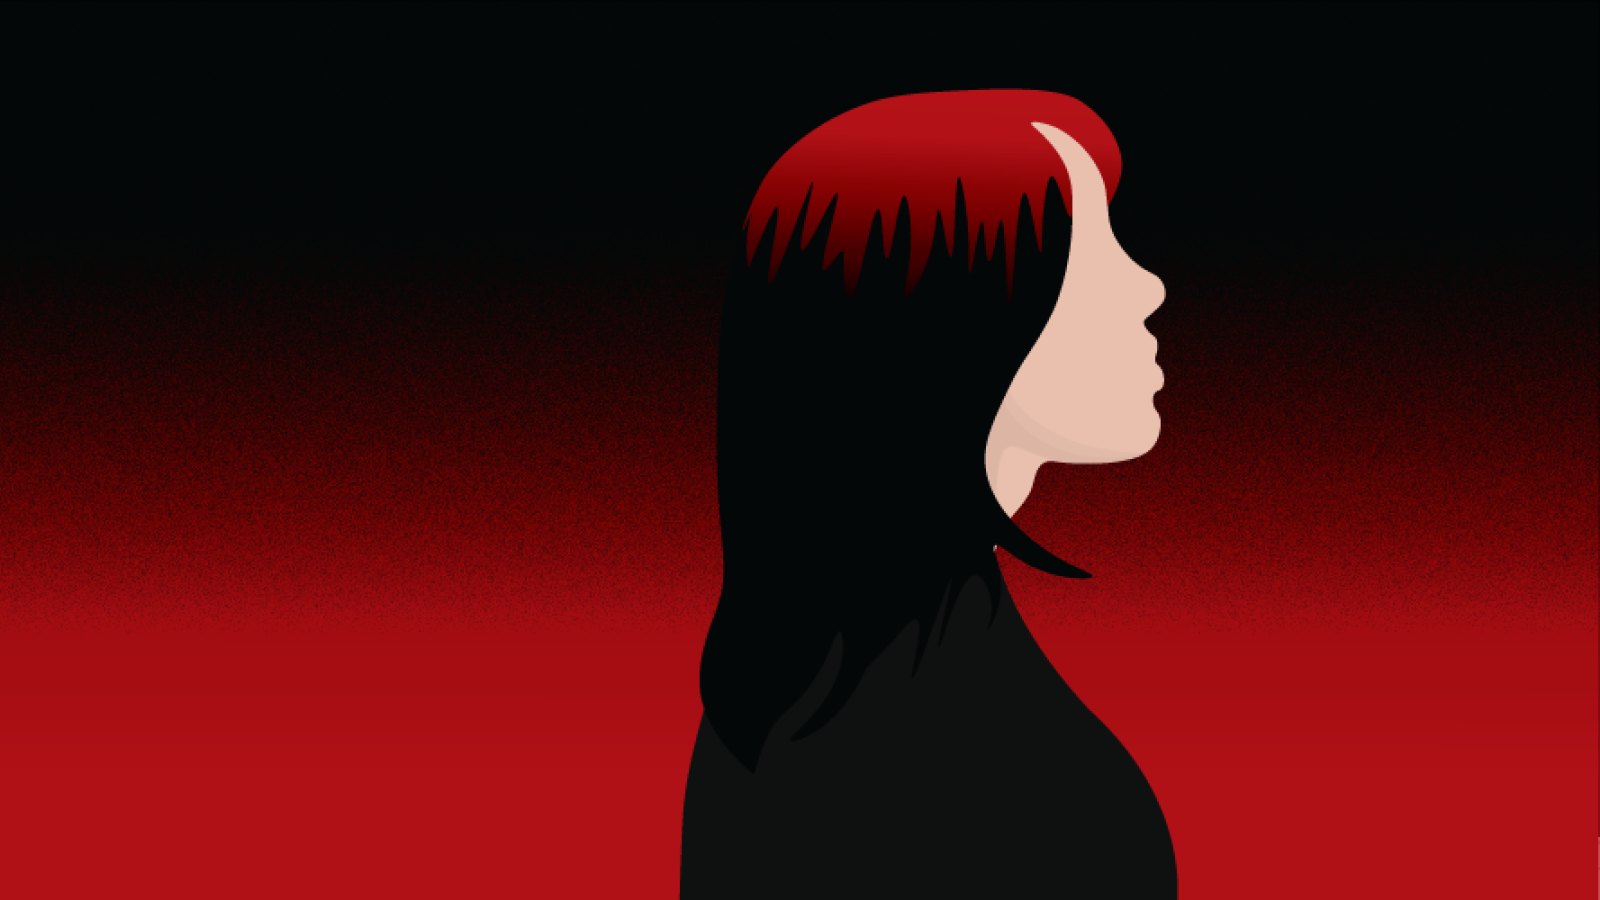 Background is a gradient from black to red and an artist drawing of a silhouette of singer